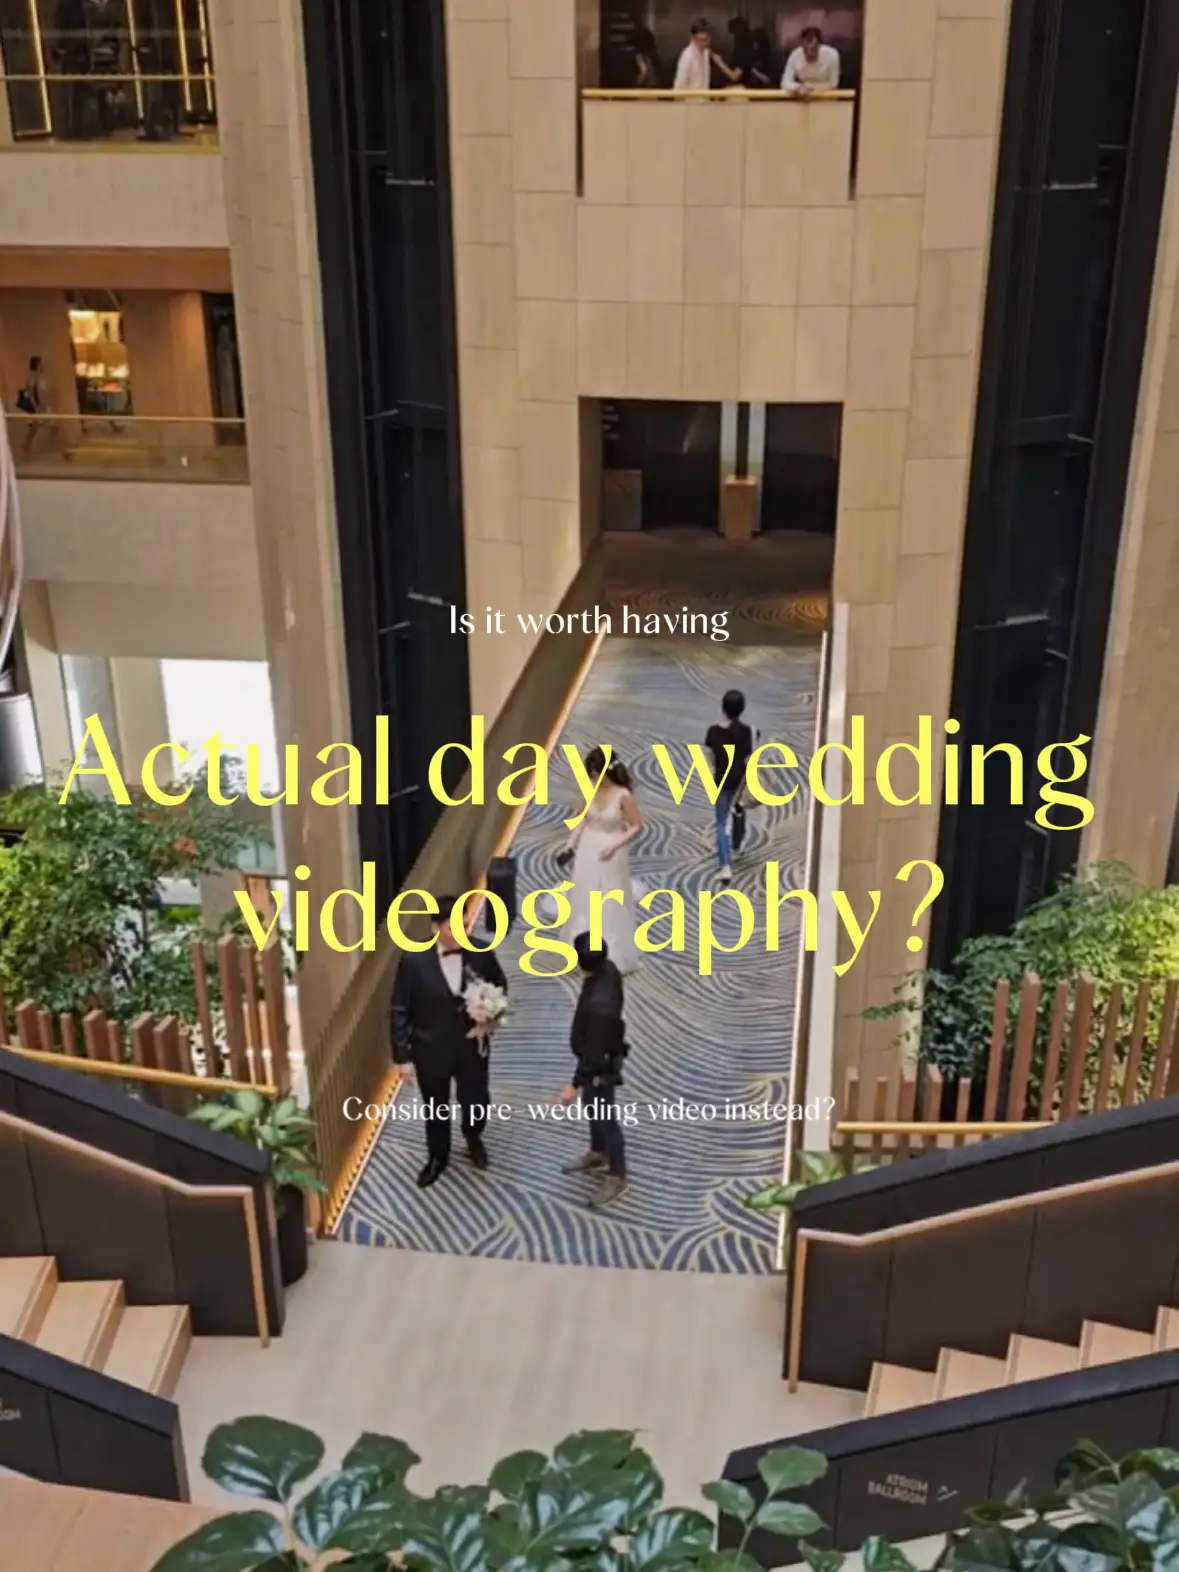 We skipped getting AD wedding videographer📹…'s images